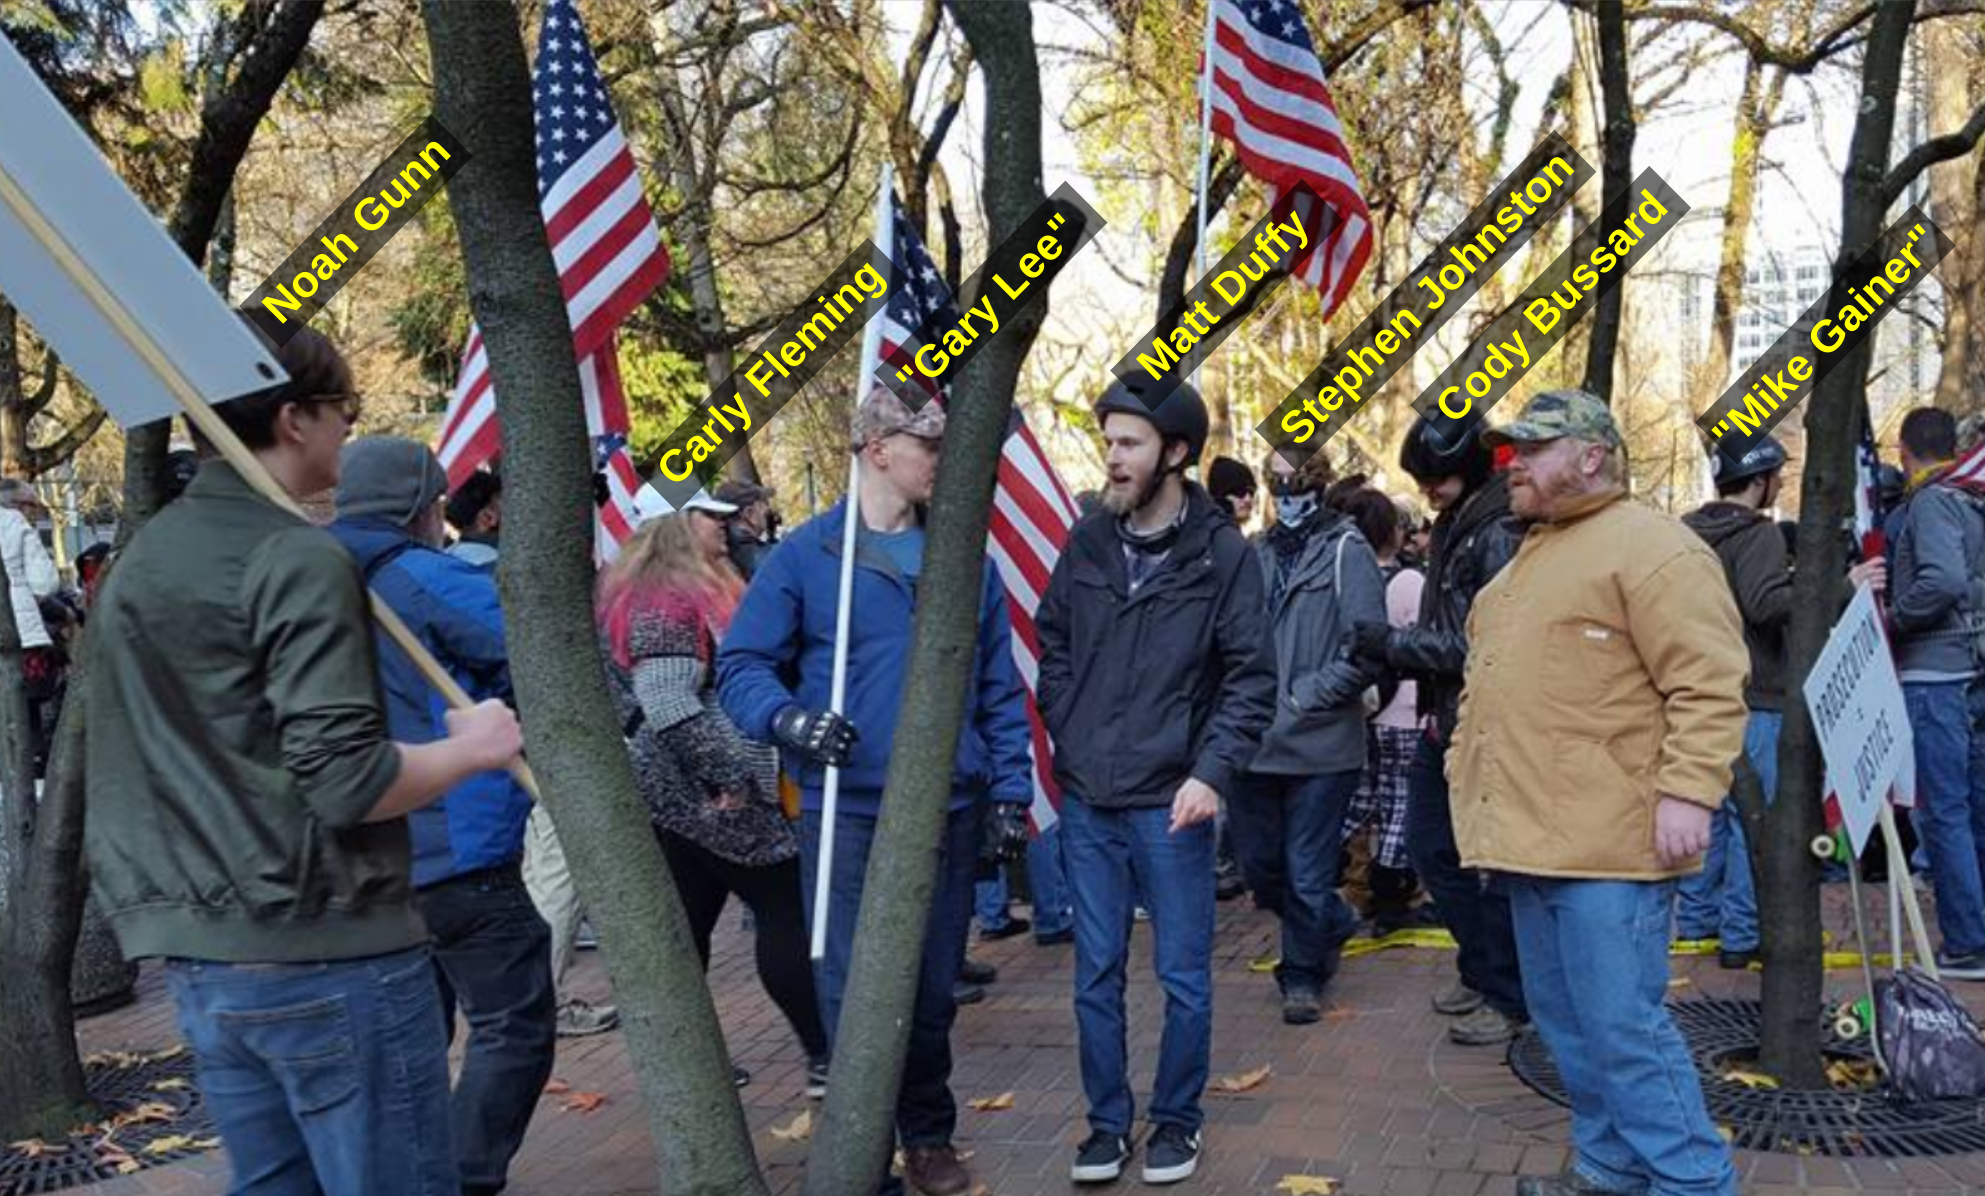 Noah Gunn hangs out with fascists at a Patriot Prayer rally